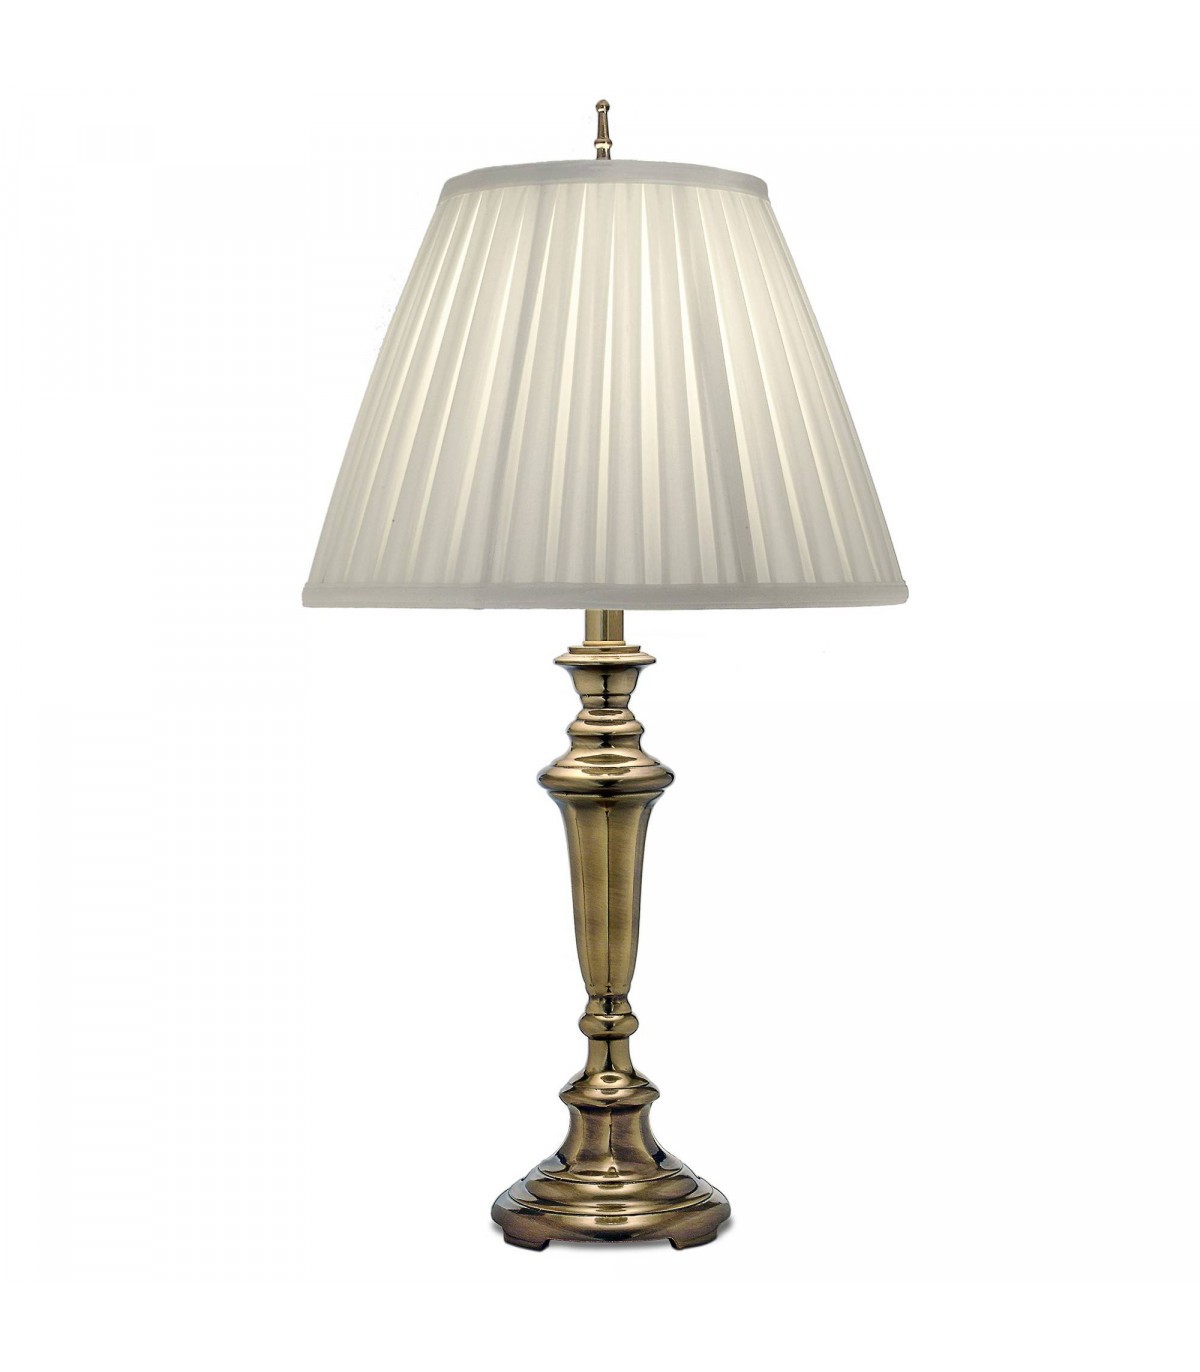 Stiffel TL-N8055-BB One Light Table Lamp, Burnished Brass Finish with Oyster Silksheen Box Pleat Shade